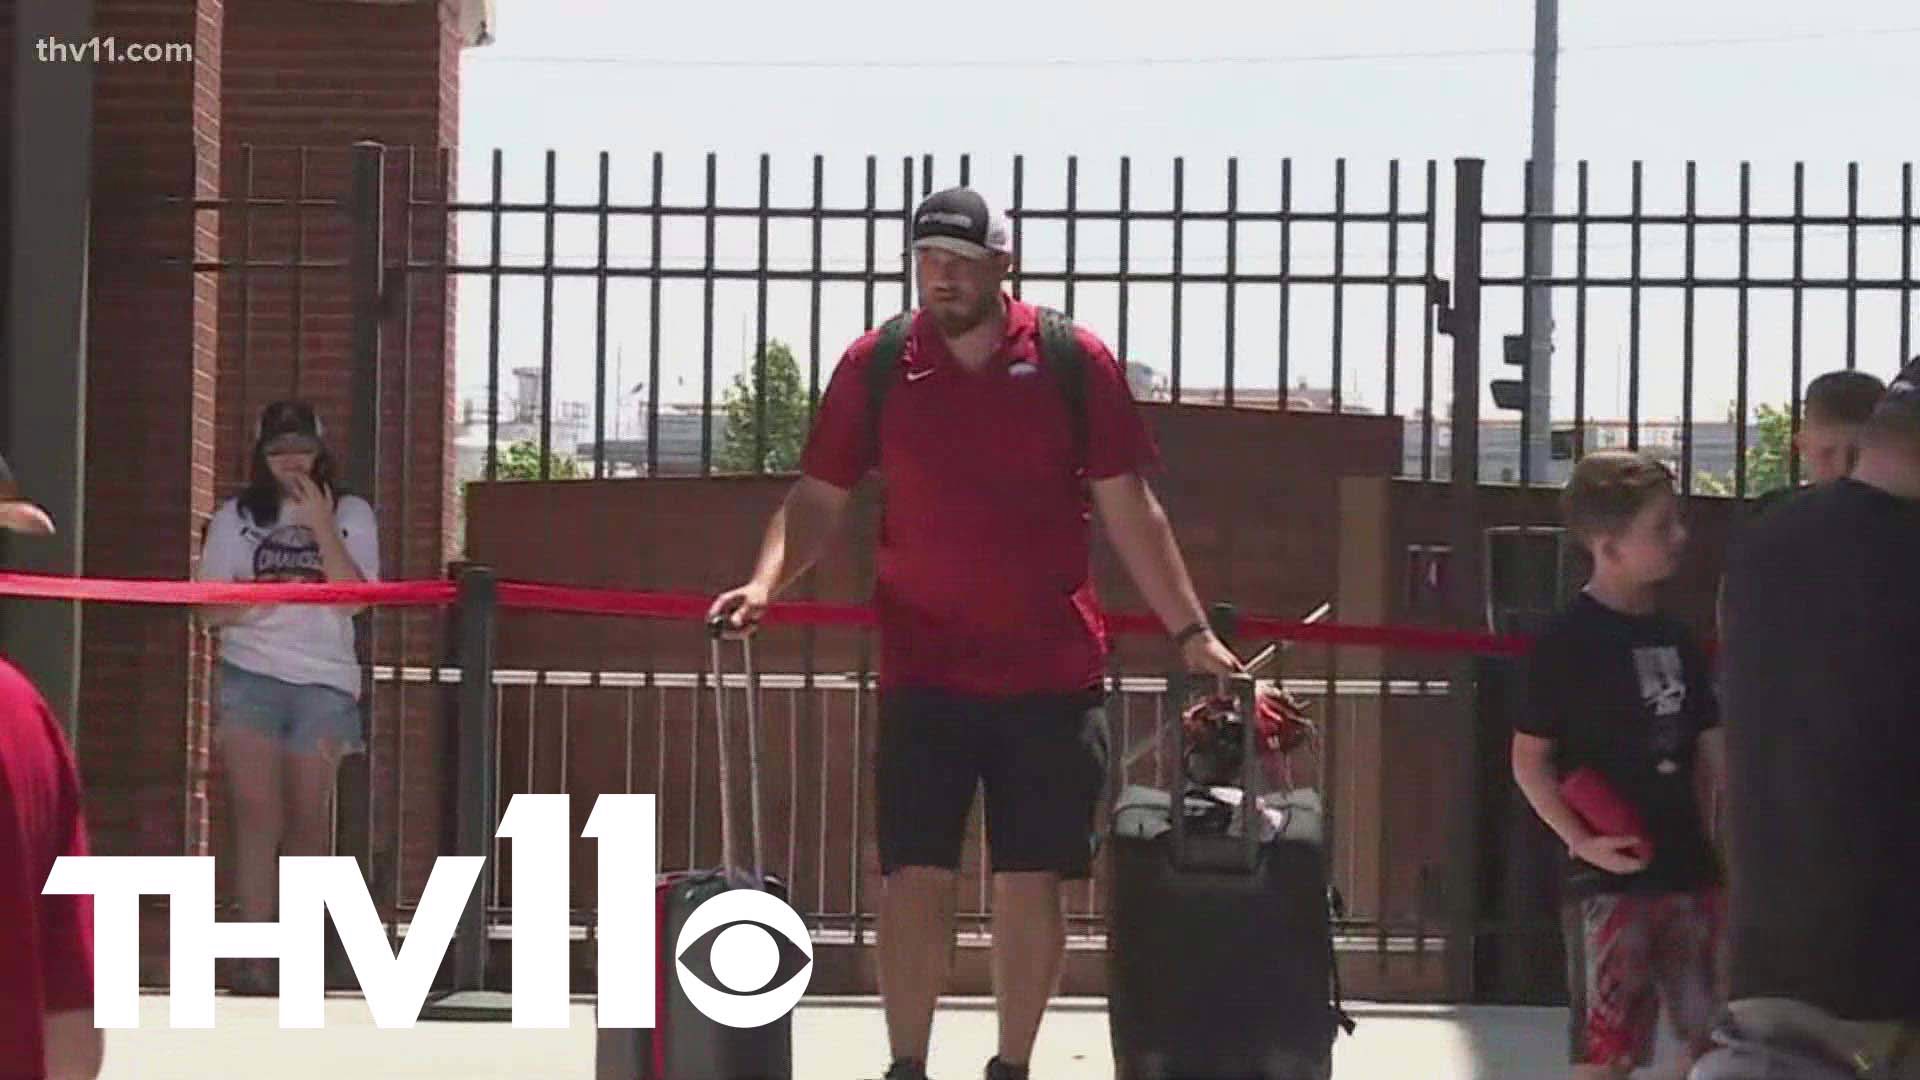 The Hogs officially hit the road to head off for Omaha where they'll play Stanford on Saturday.